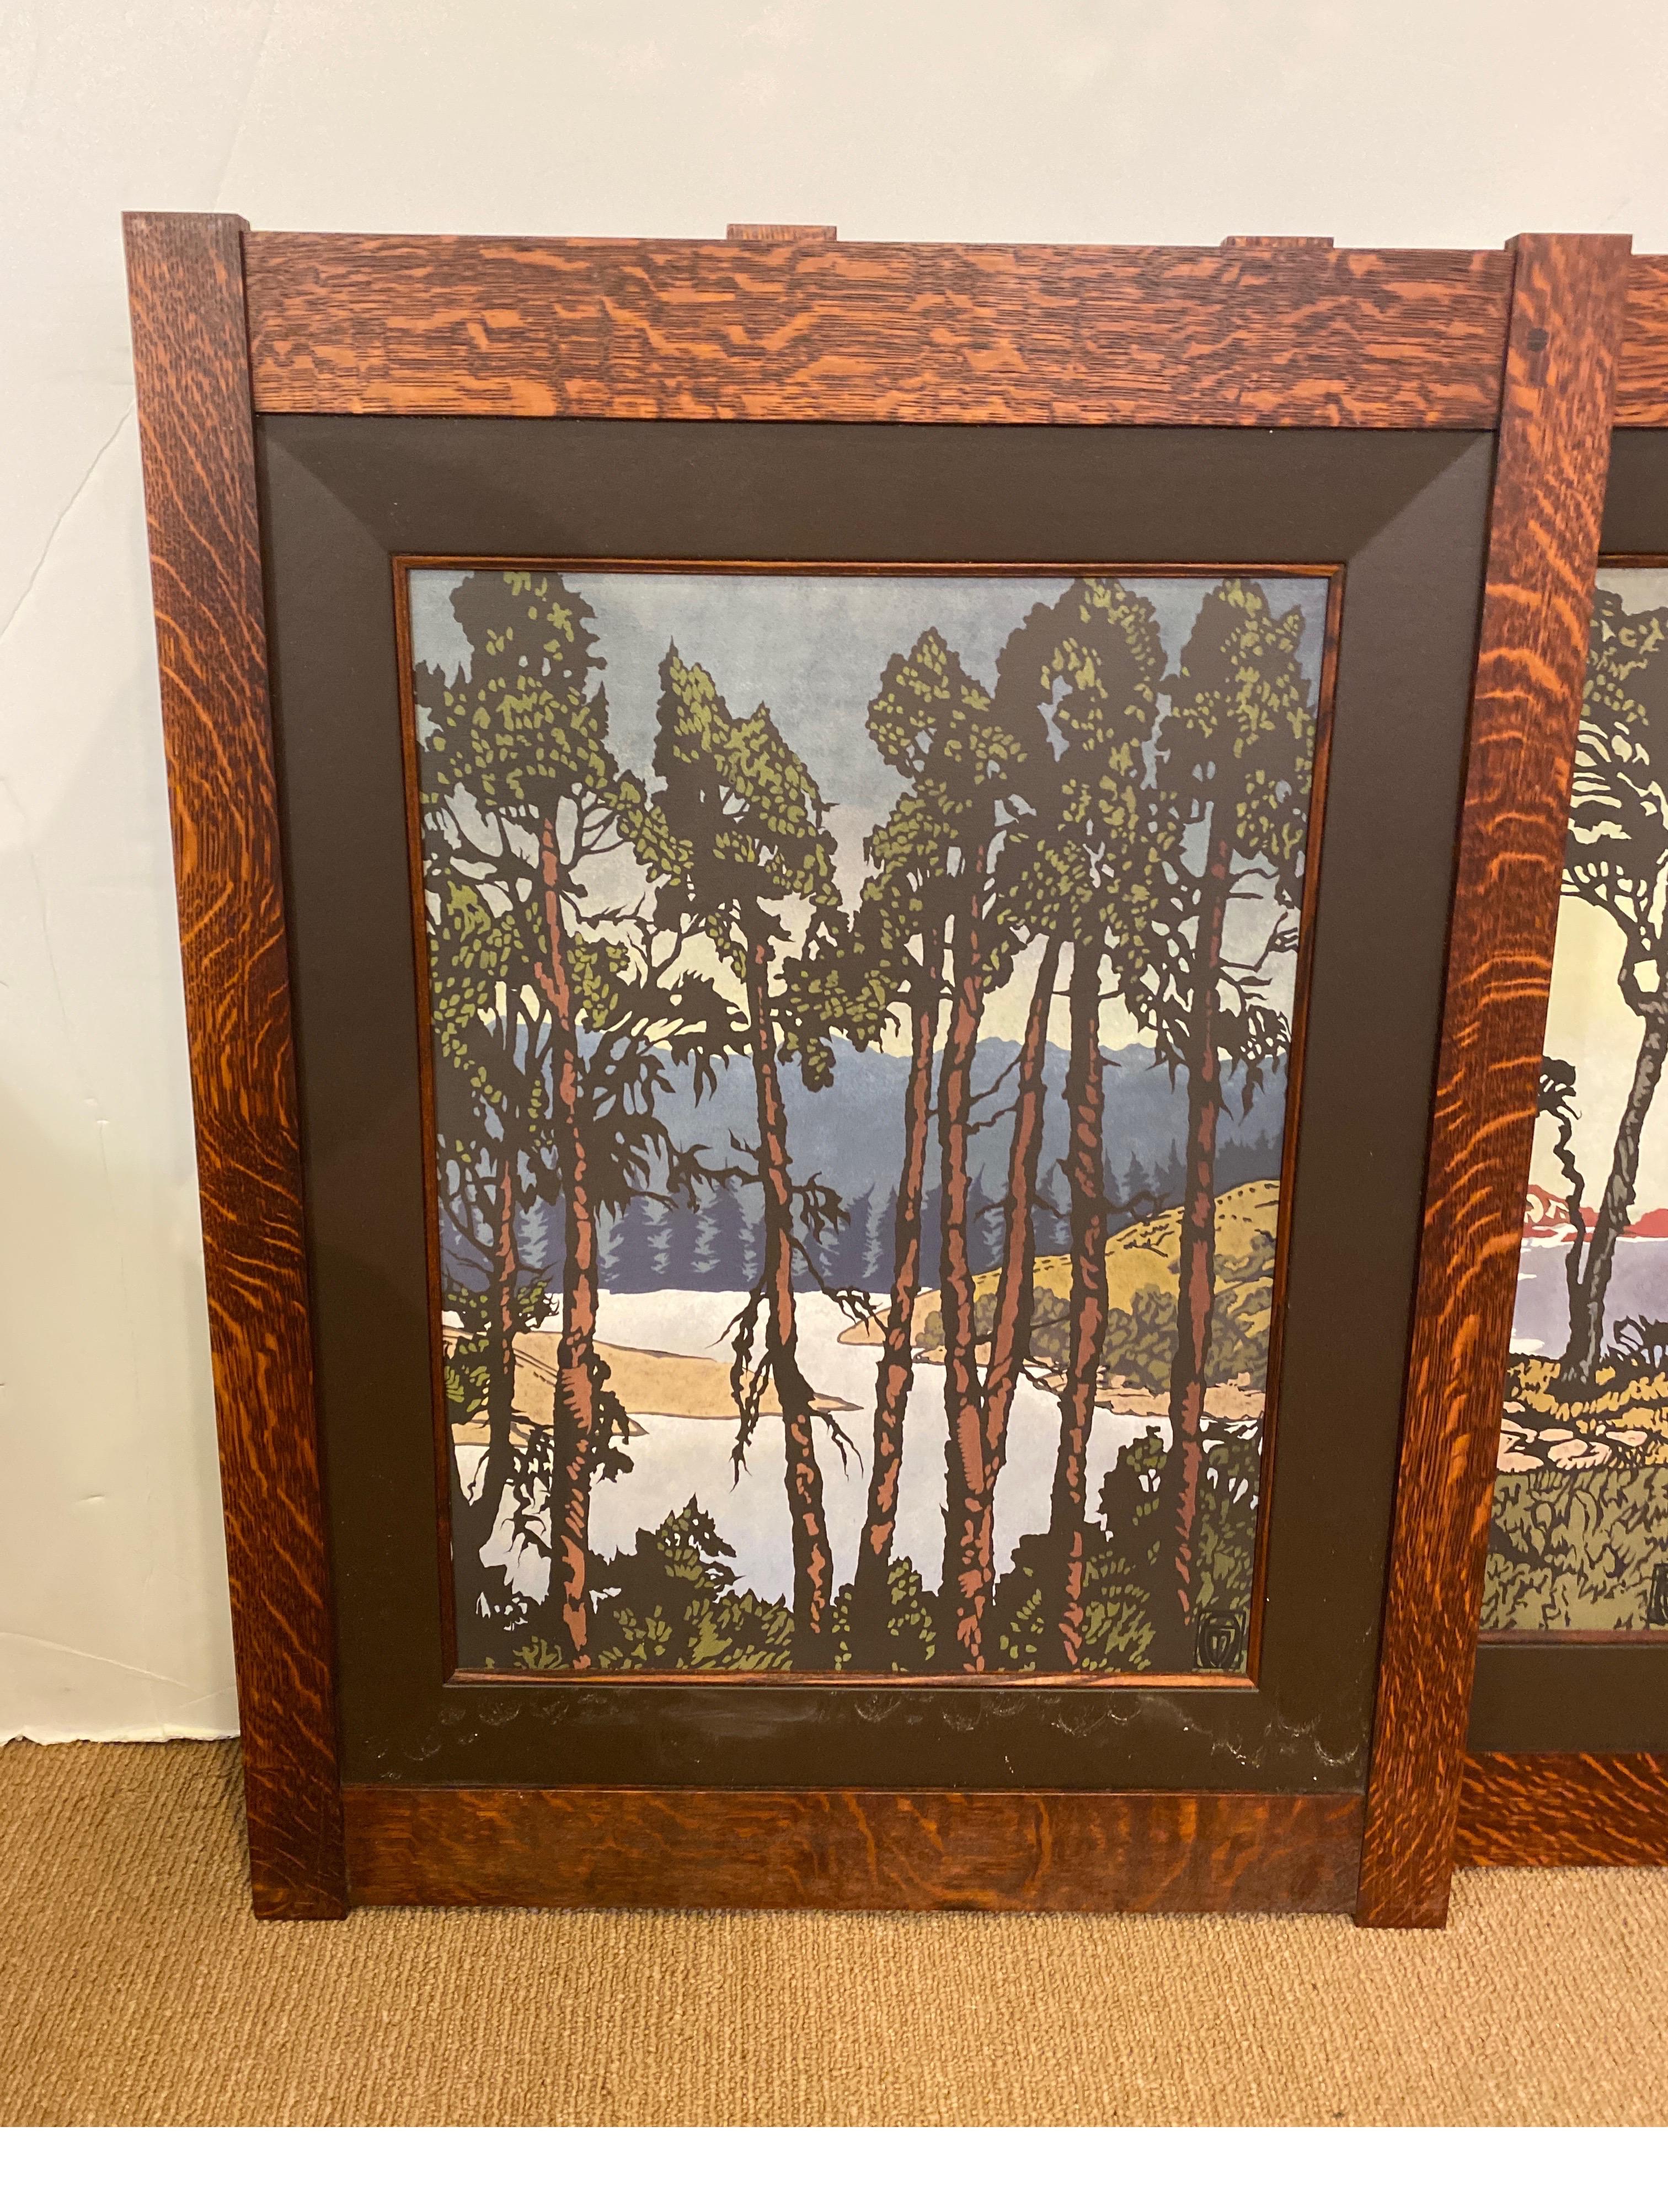 A Set of Four Arts and Crafts Framed Prints by Anita Munman, The late 20th century prints with classic arts and craft style original dark oak frames. Three with the original certificate of authenticity.